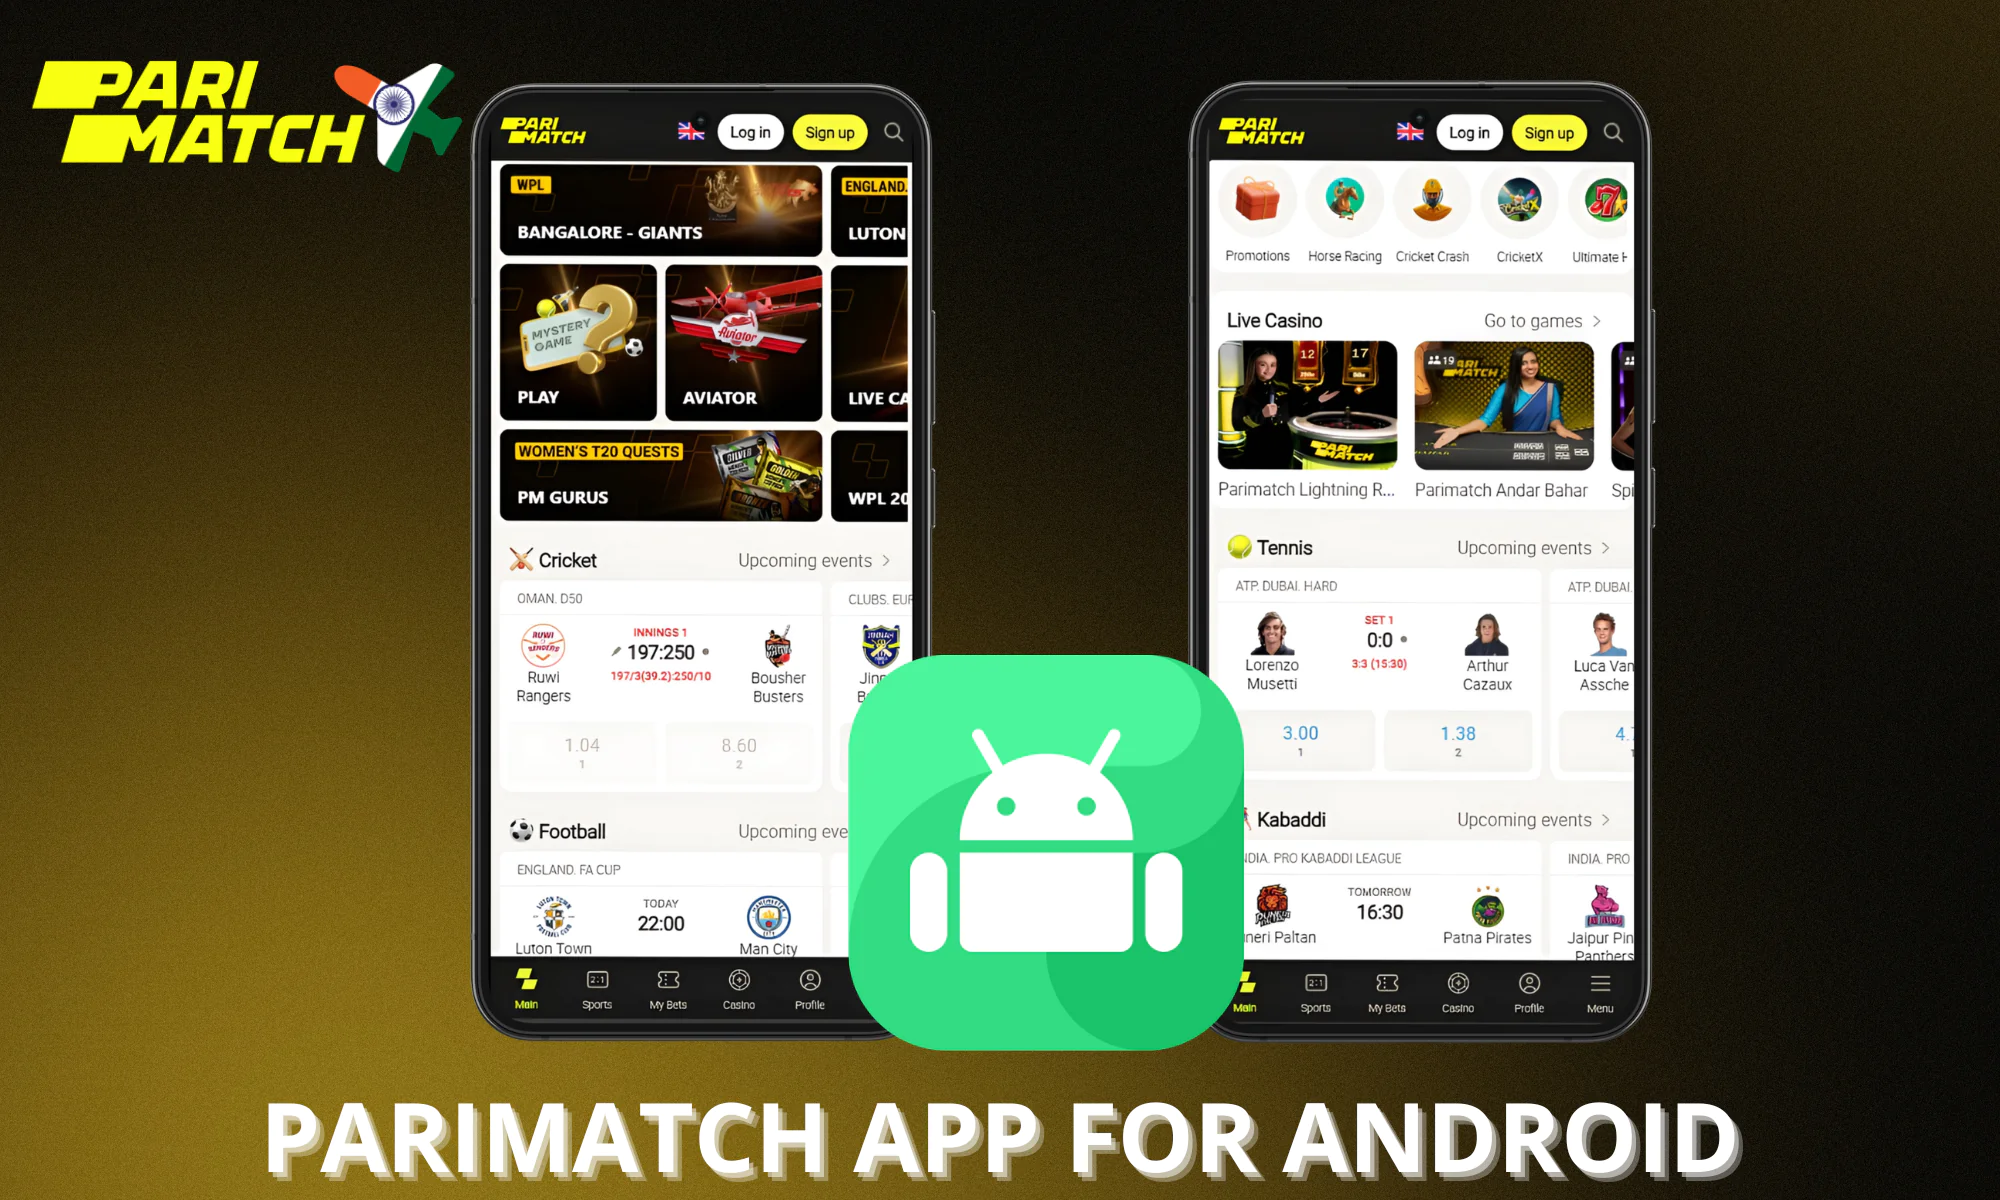 The Parimatch app is free for players from India